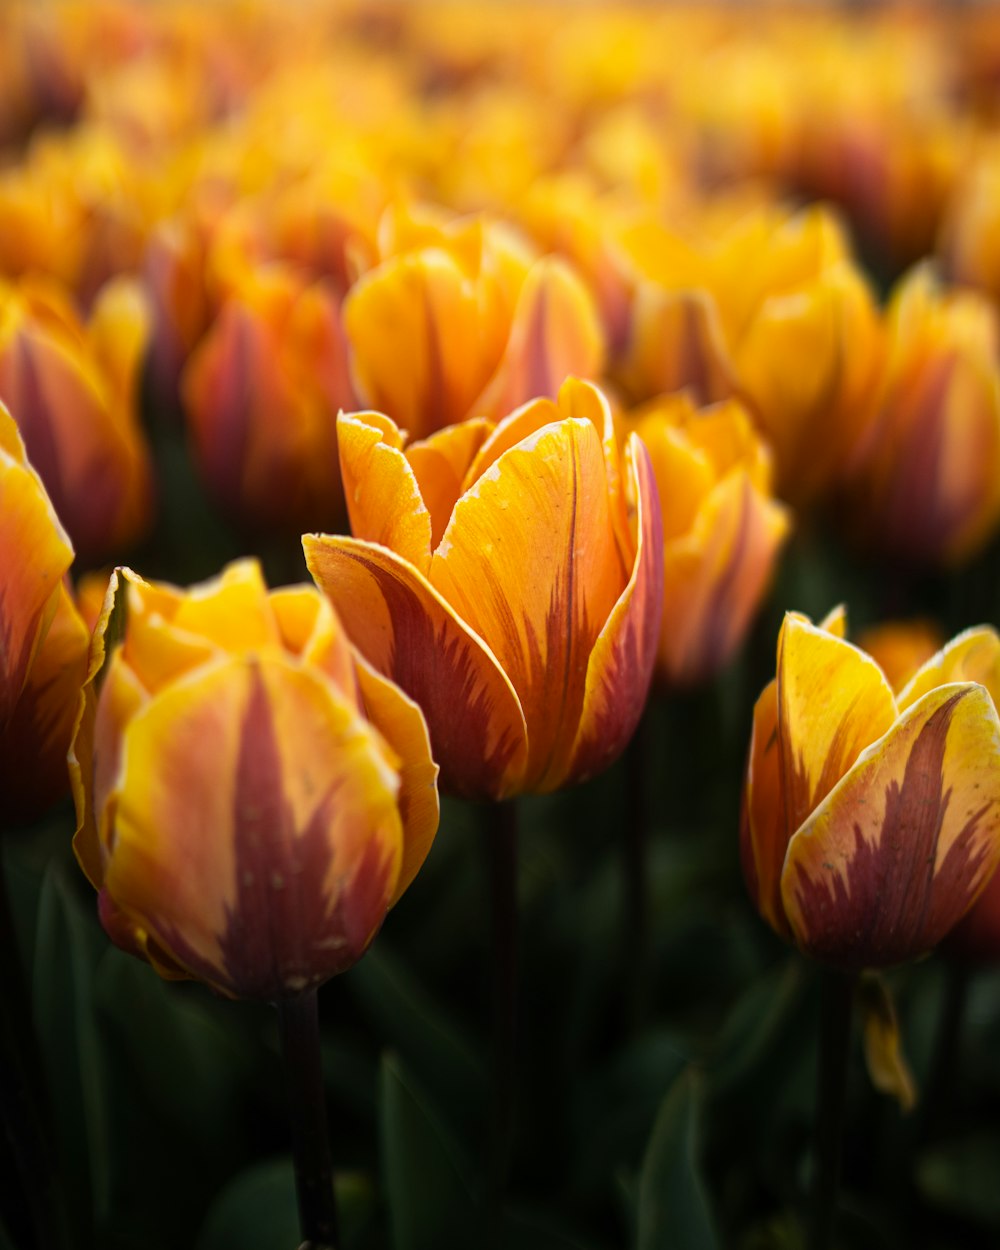 yellow and red tulips in bloom during daytime